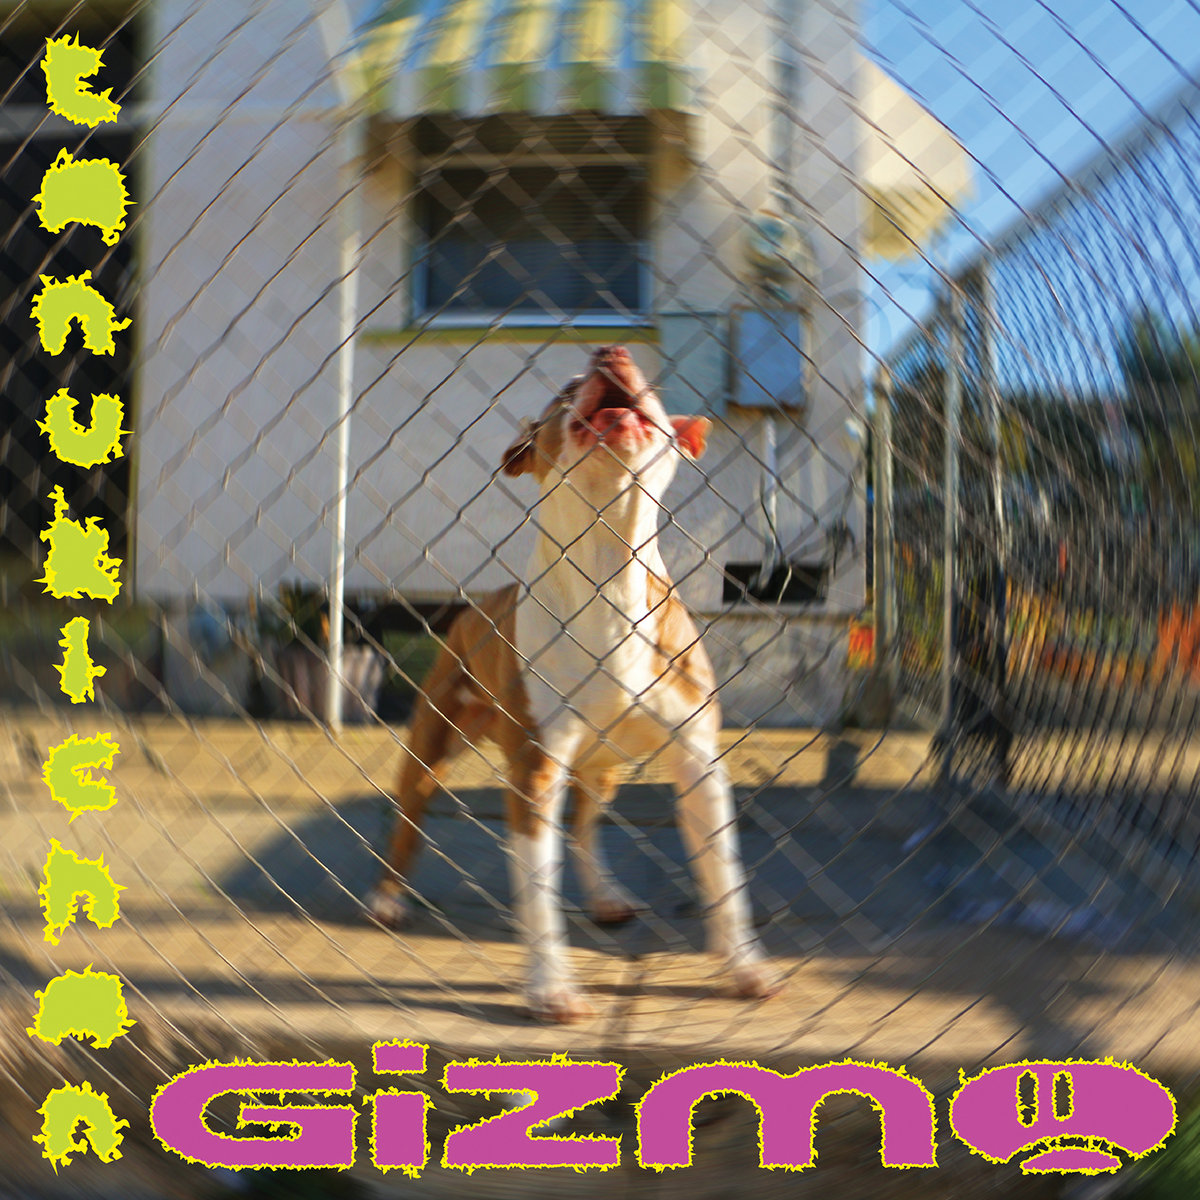 Cover art for Gizmo by Tanukichan. Dog howling behind a fence.